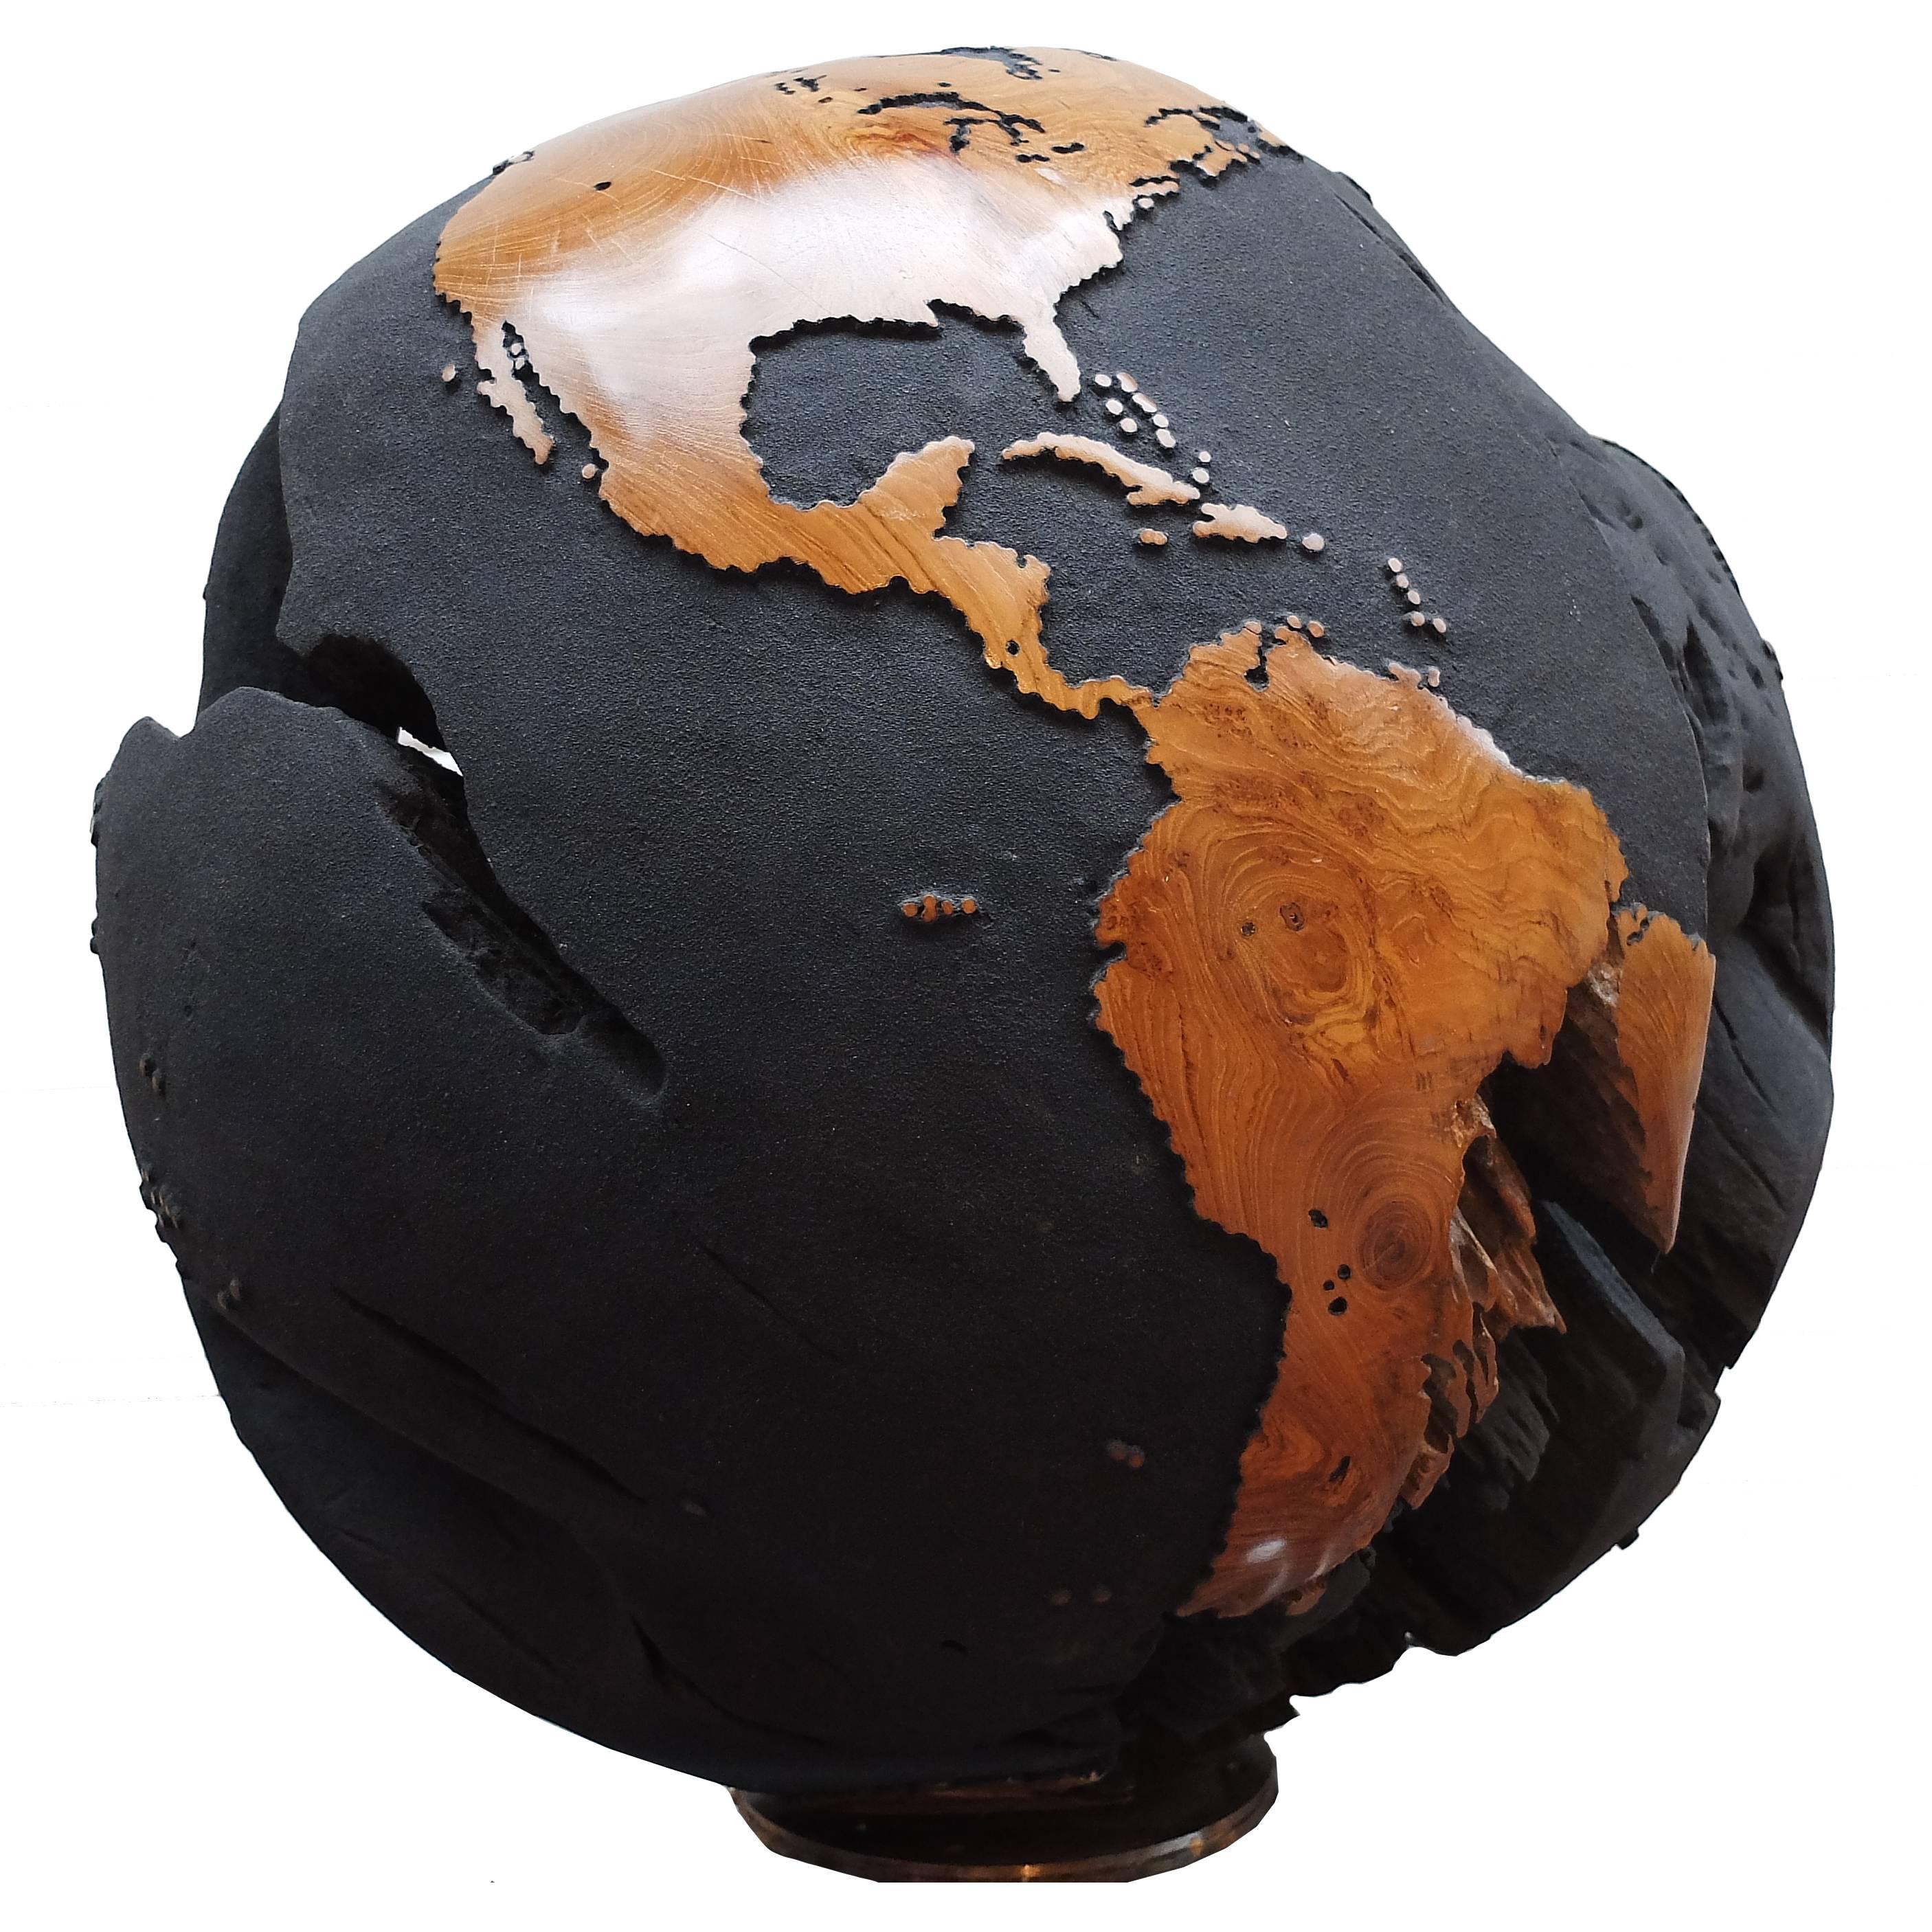 Monumental One of a Kind Black Wooden Globe / "Abyss"